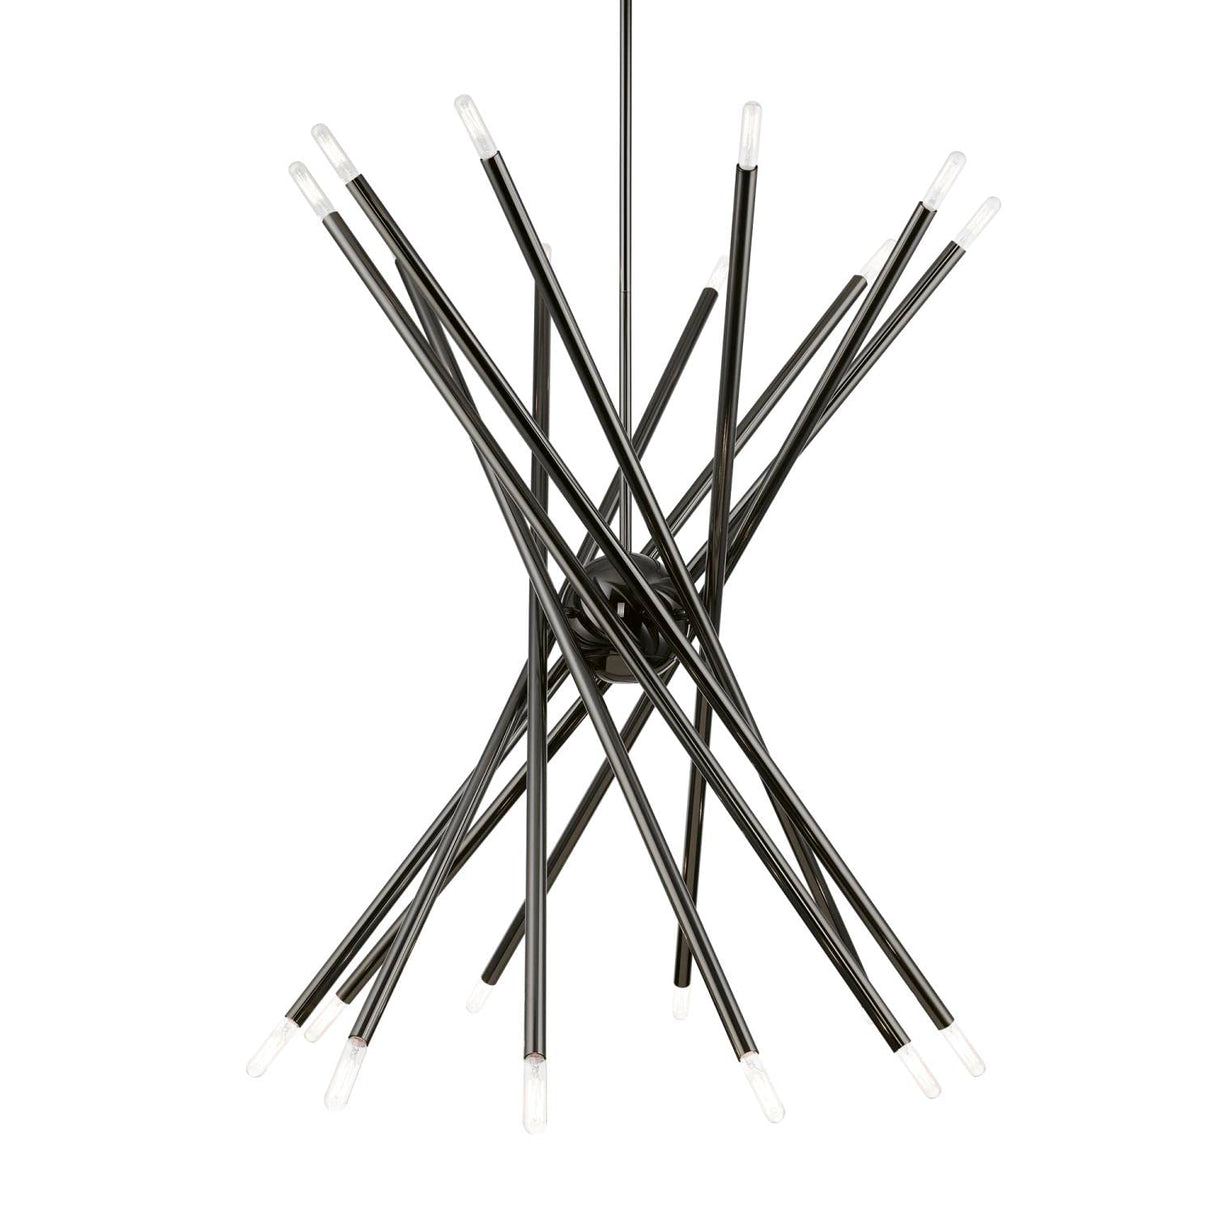 Livex Lighting 46779-46 Soho - 20 Light Large Chandelier In Transitional Style-36.5 Inches Tall and 37.5 Inches Wide, Finish Color: Black Chrome